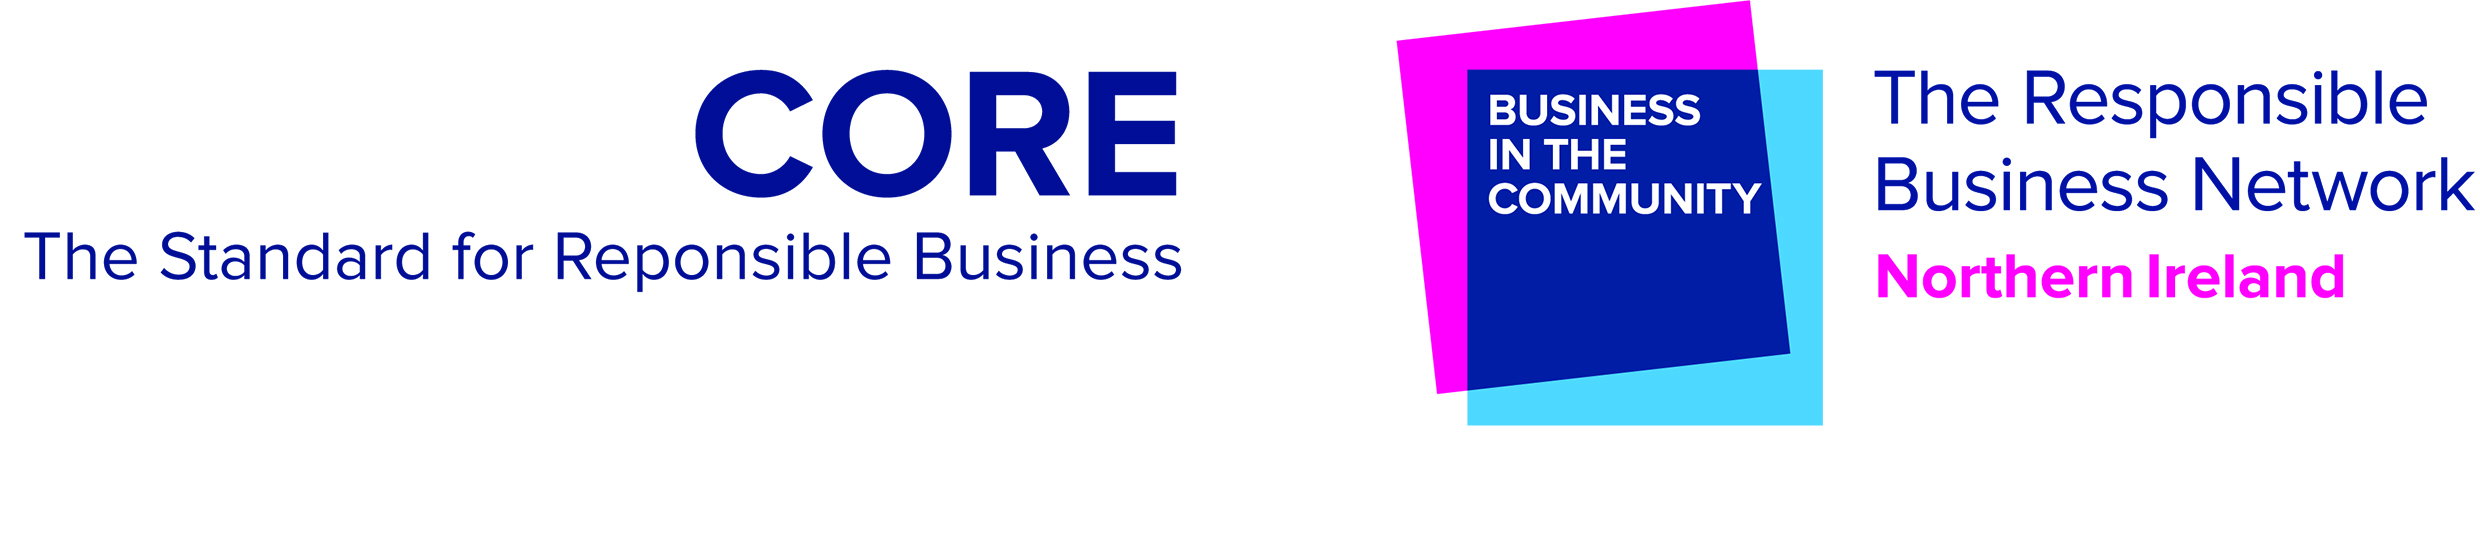 Core: The Standard for Responsible Business. Business In the Community. The Responsible Business Network Northern Ireland.